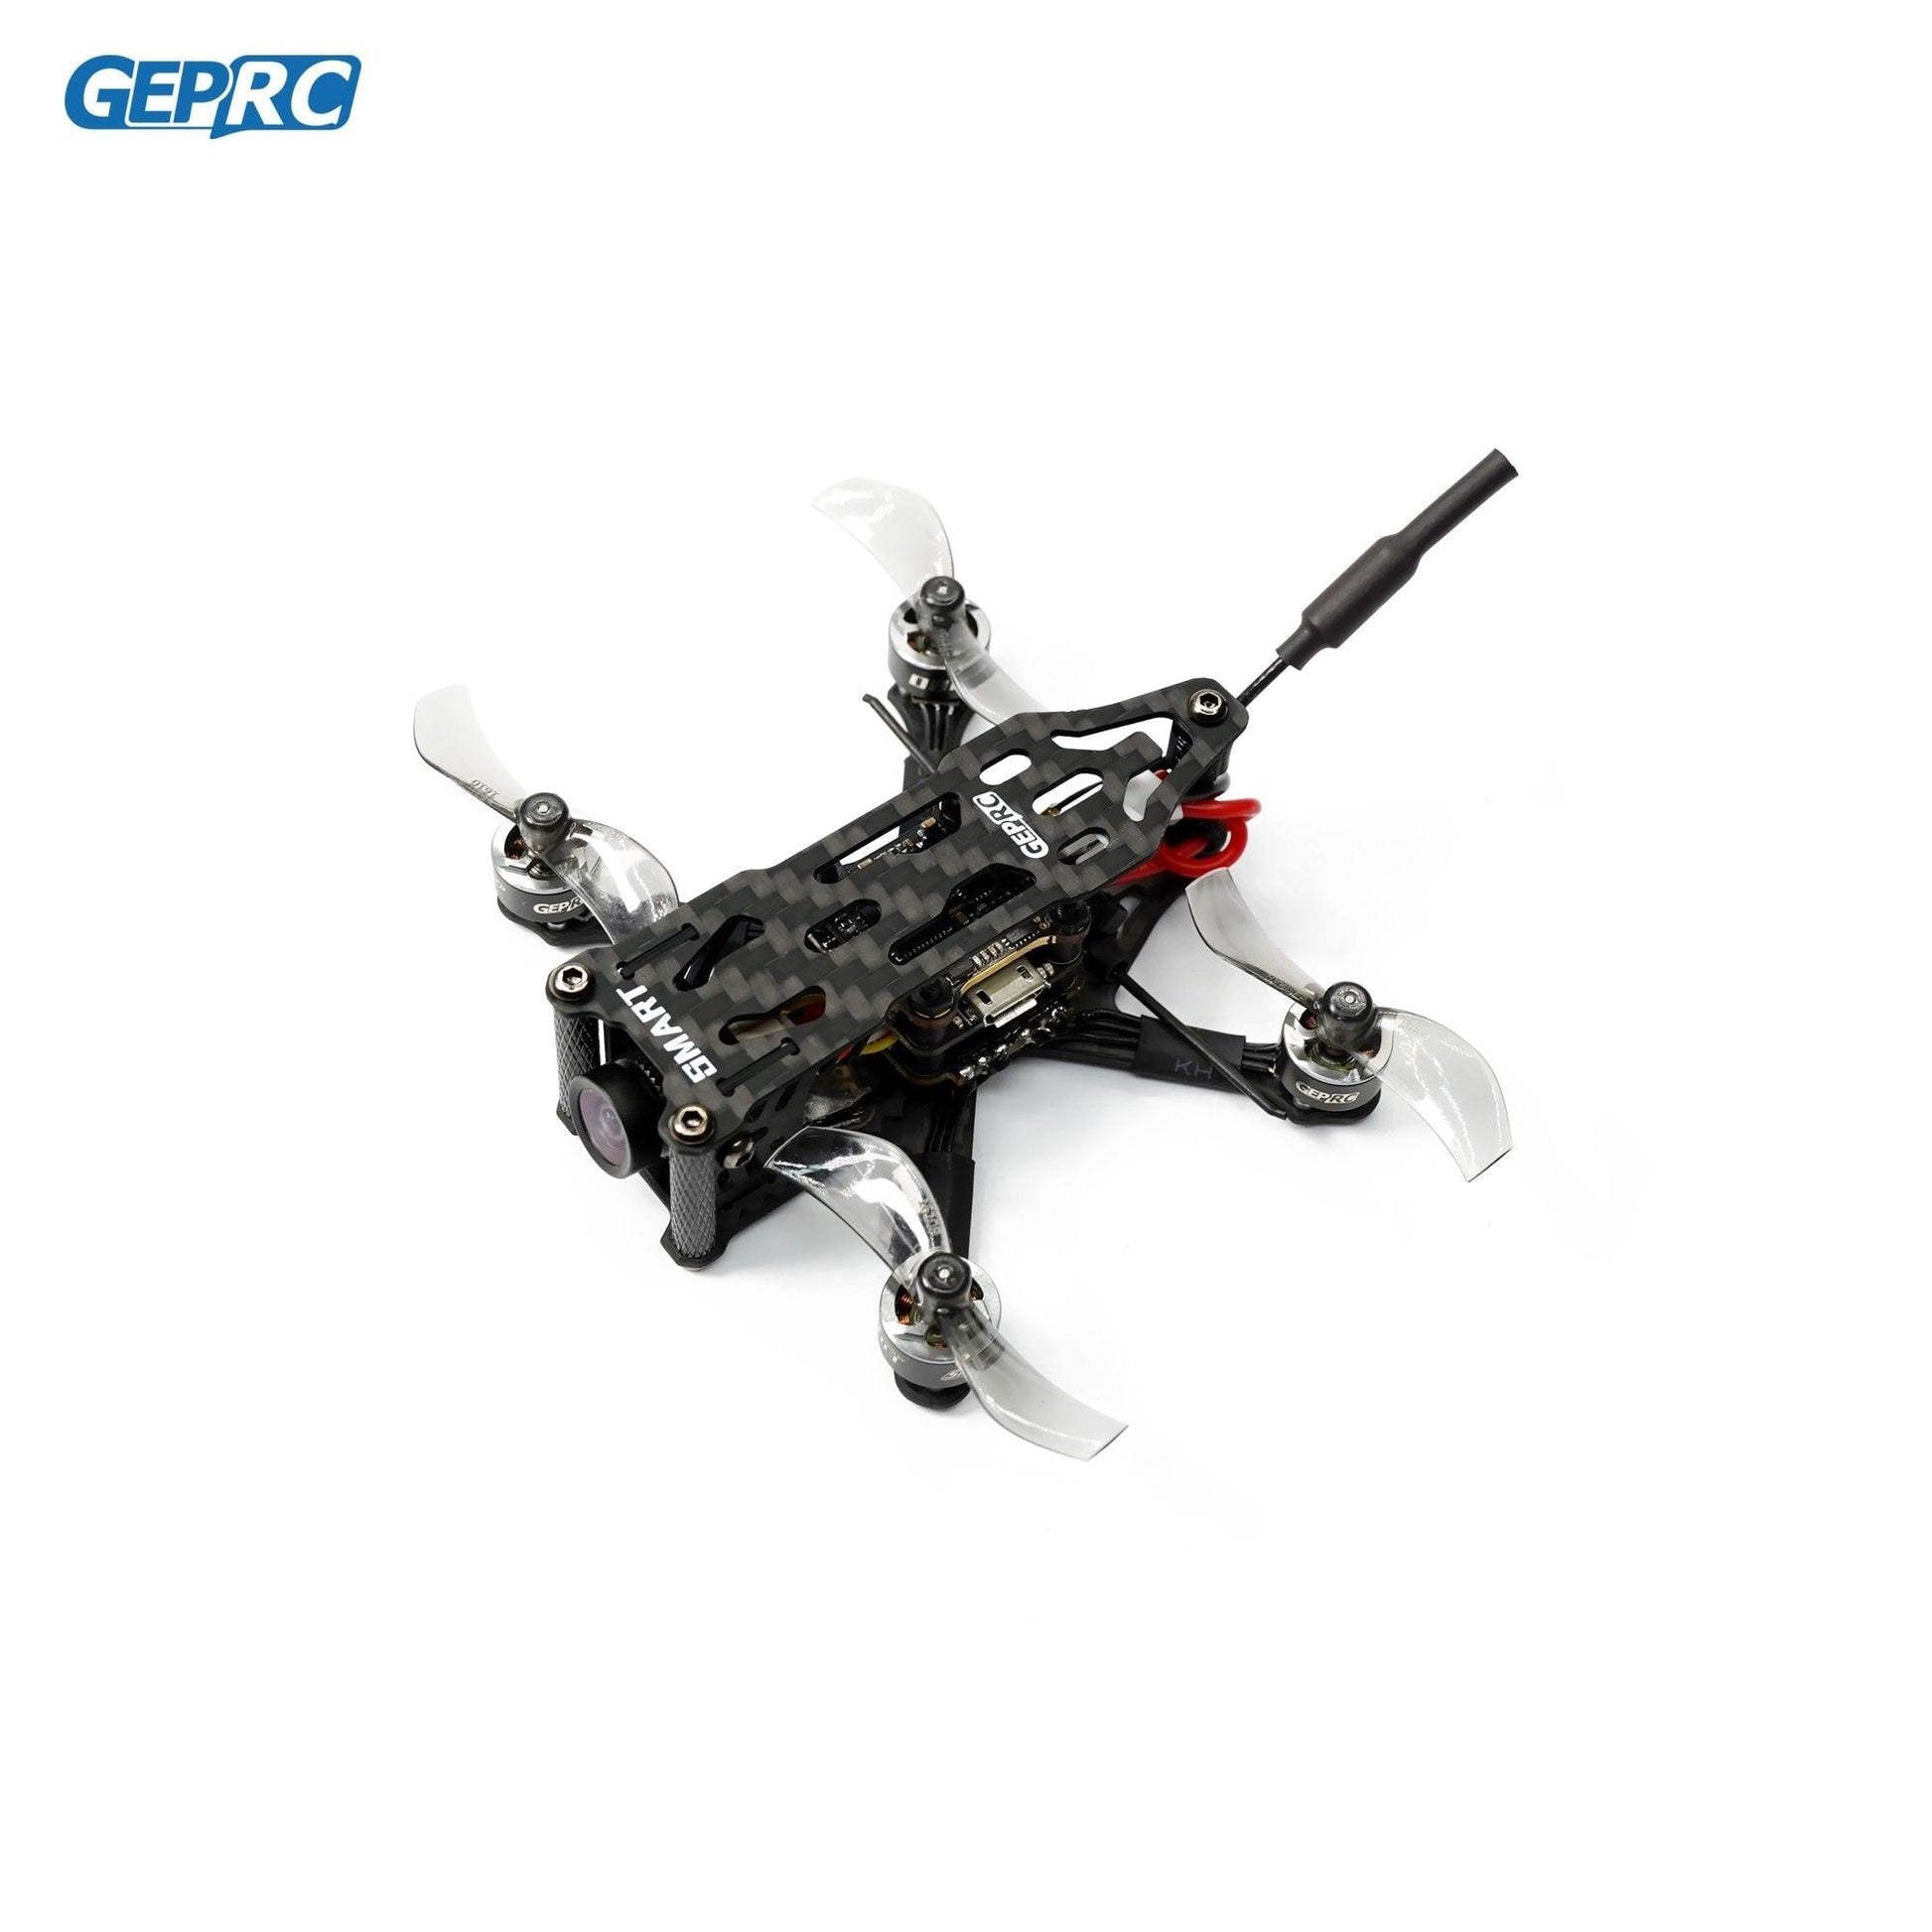 GEPRC SMART16 Freestyle FPV Drone - Caddx Ant Camera GR0803-11000KV Motor STABLE F411 FC For RC FPV Lightweight Quadcopter Drone - RCDrone